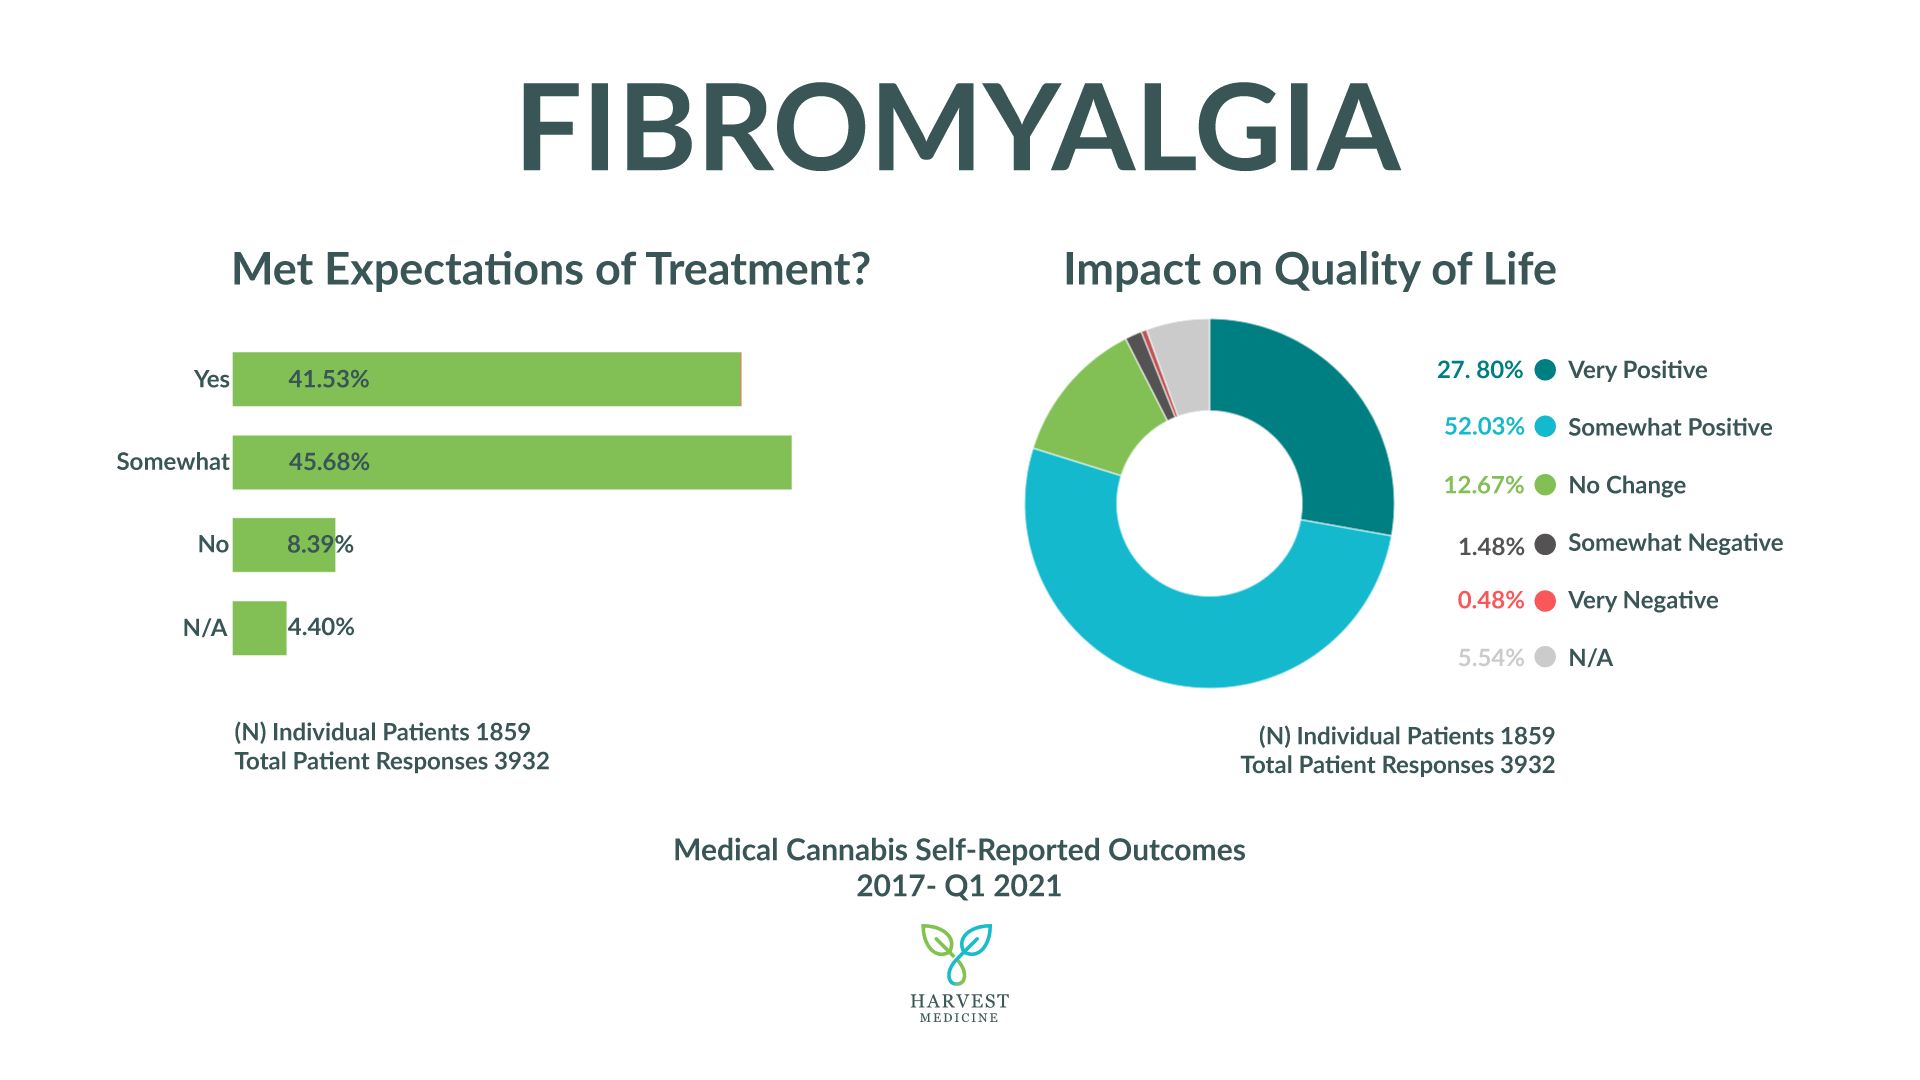 Harvest Medicine's patient self-reported outcomes for Fibromyalgia from 2017-2021. Sample size 1859